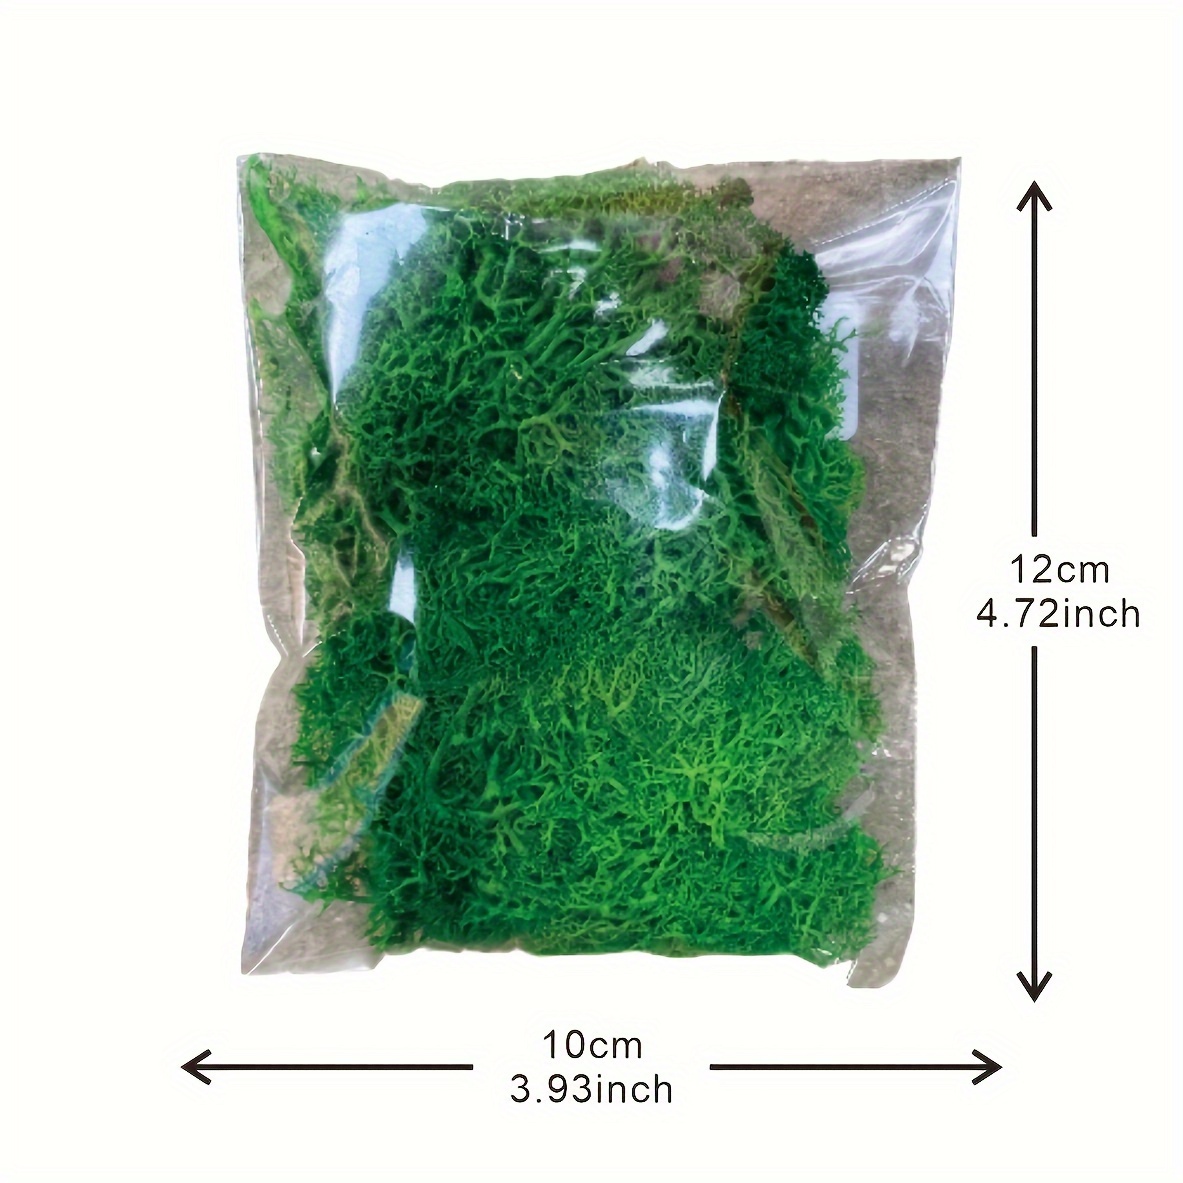 20g Artificial Fake Moss, DIY Simulation Moss Grass Micro Landscape Layout,  Green Plant Lawn Potted Plant Window Decoration Landscape Design